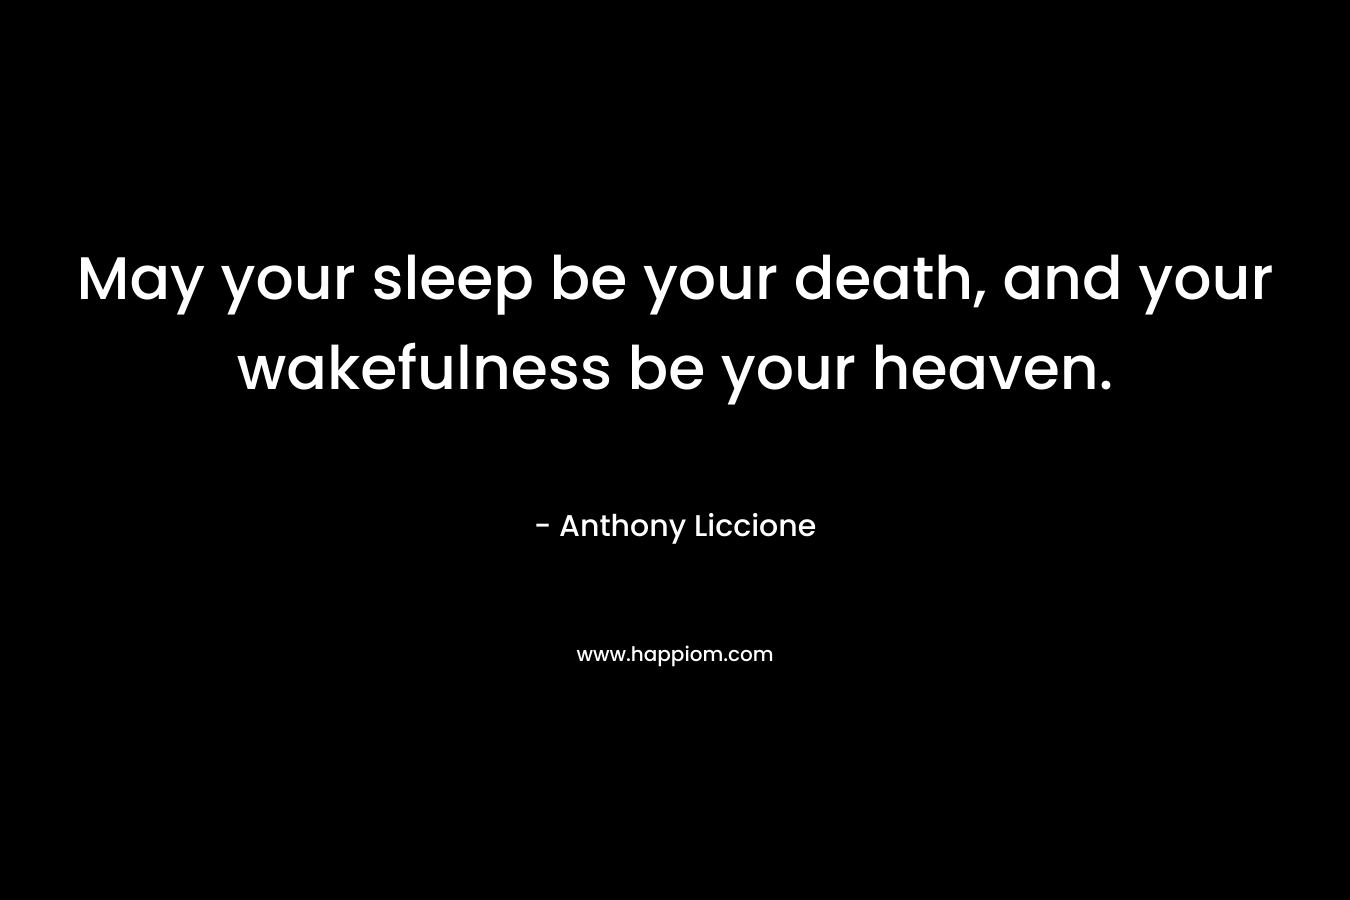 May your sleep be your death, and your wakefulness be your heaven. – Anthony Liccione